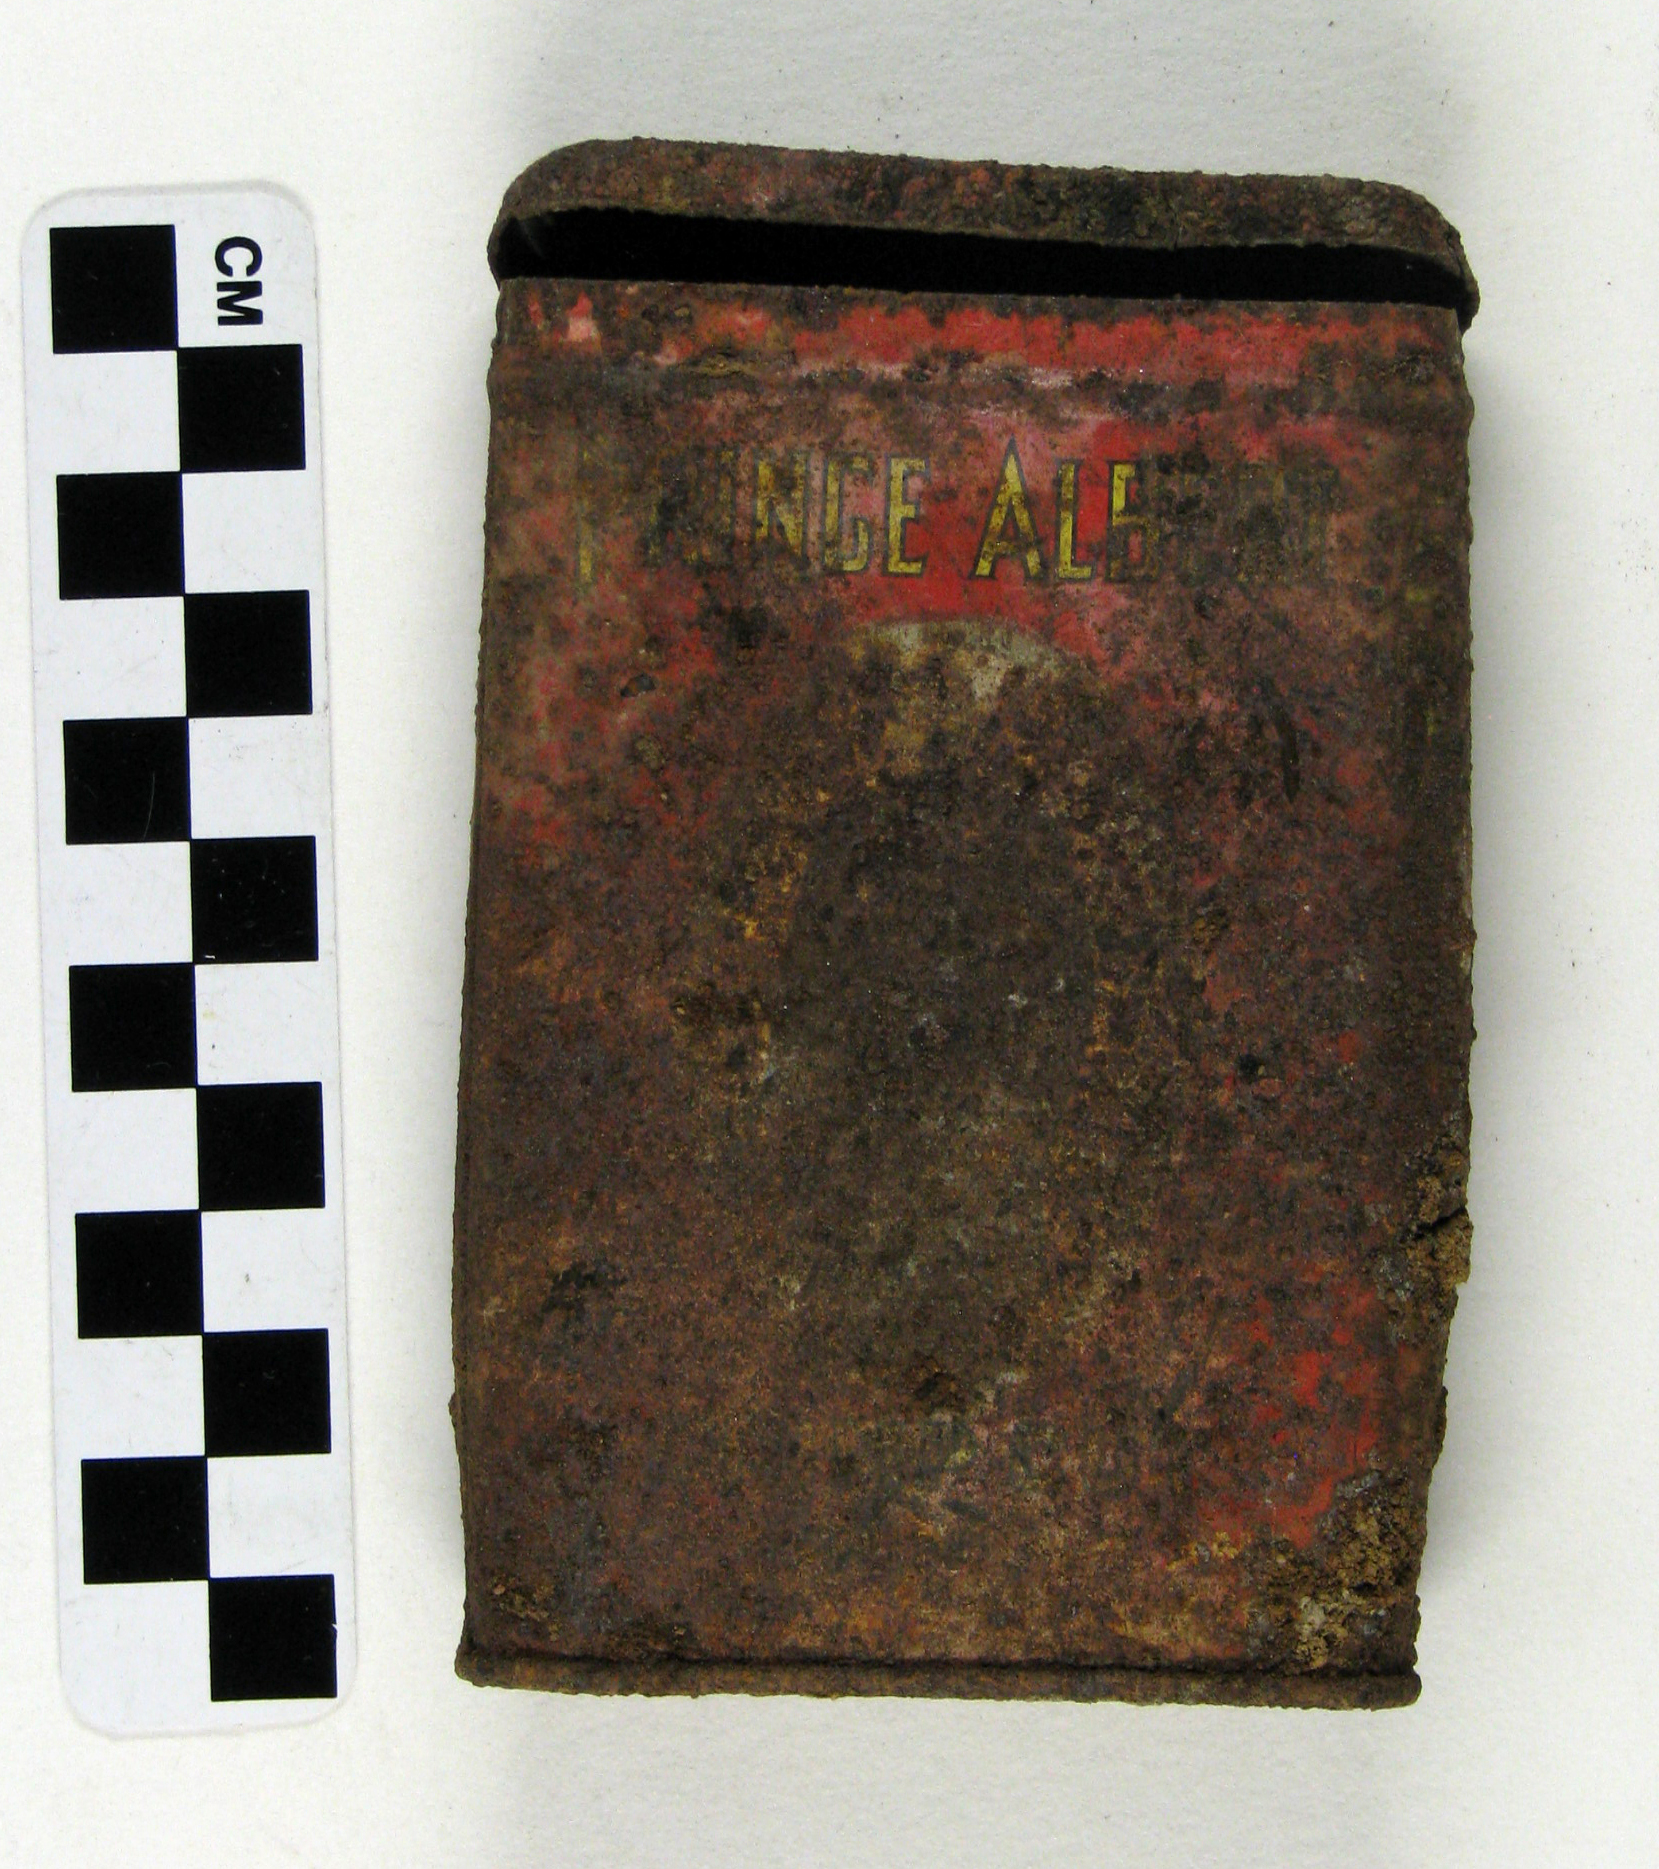 An old tobacco tin found at Fort Vasquez.